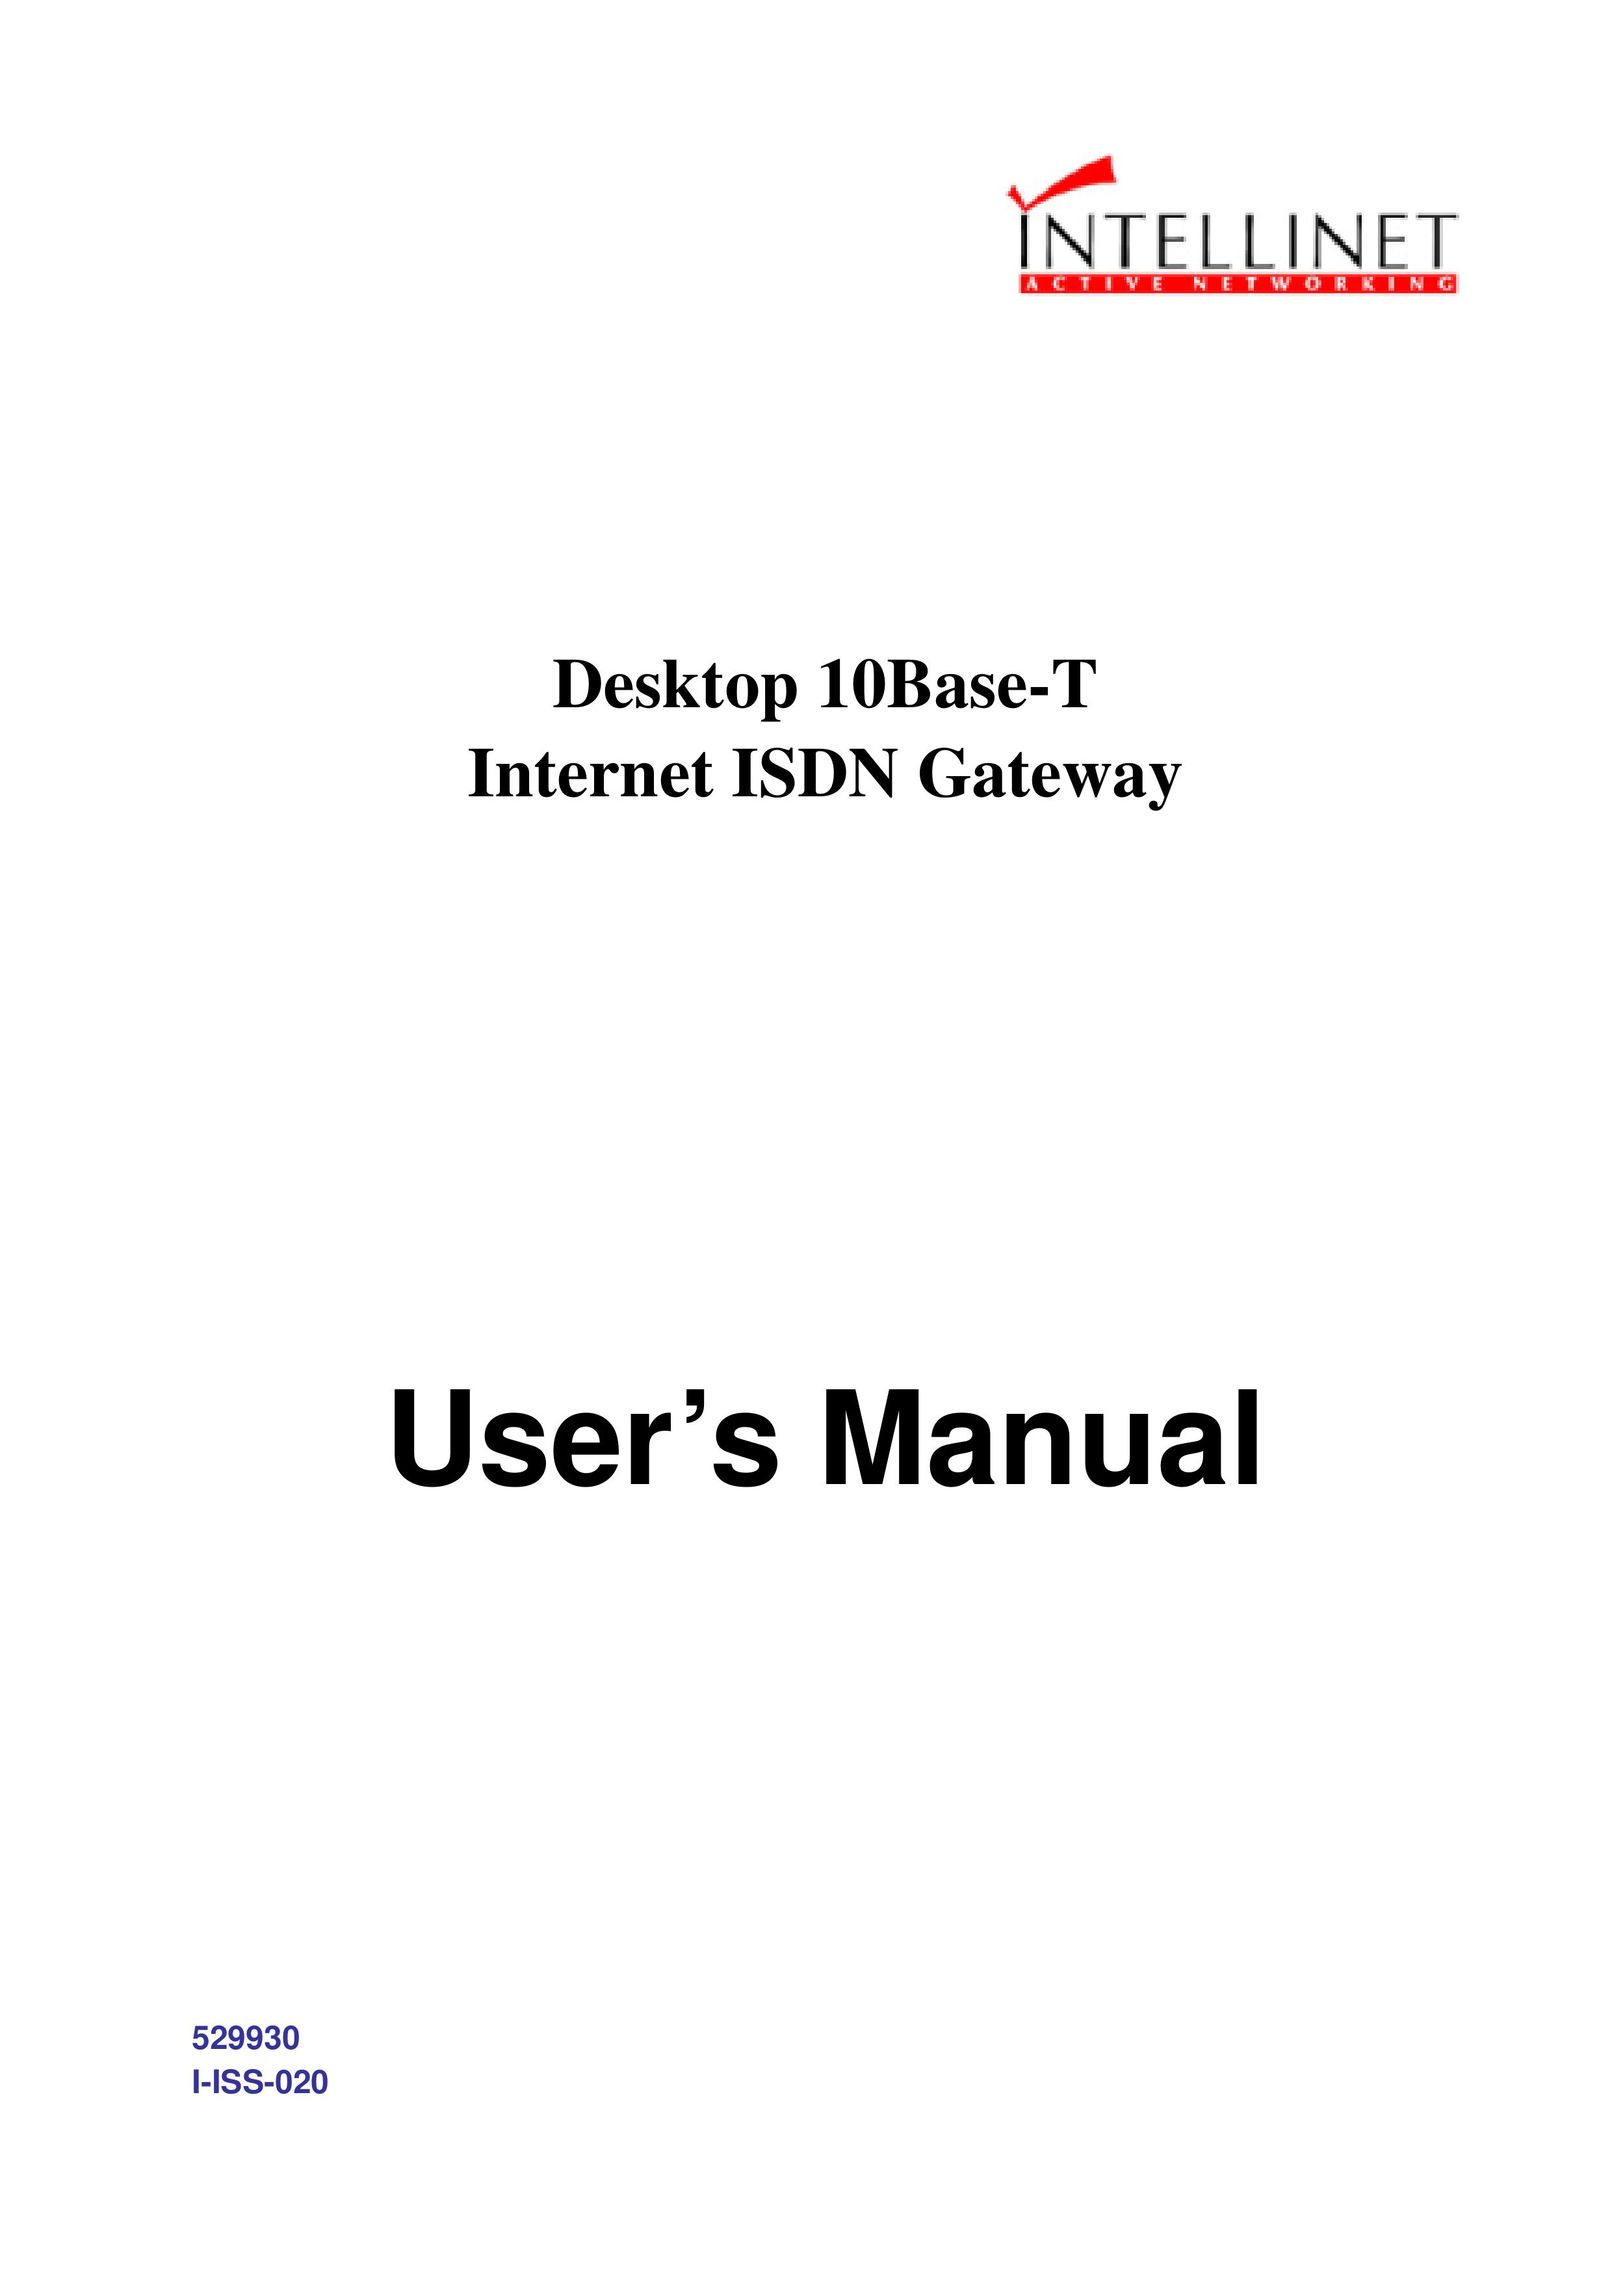 Intellinet Network Solutions I-ISS-020 Network Router User Manual